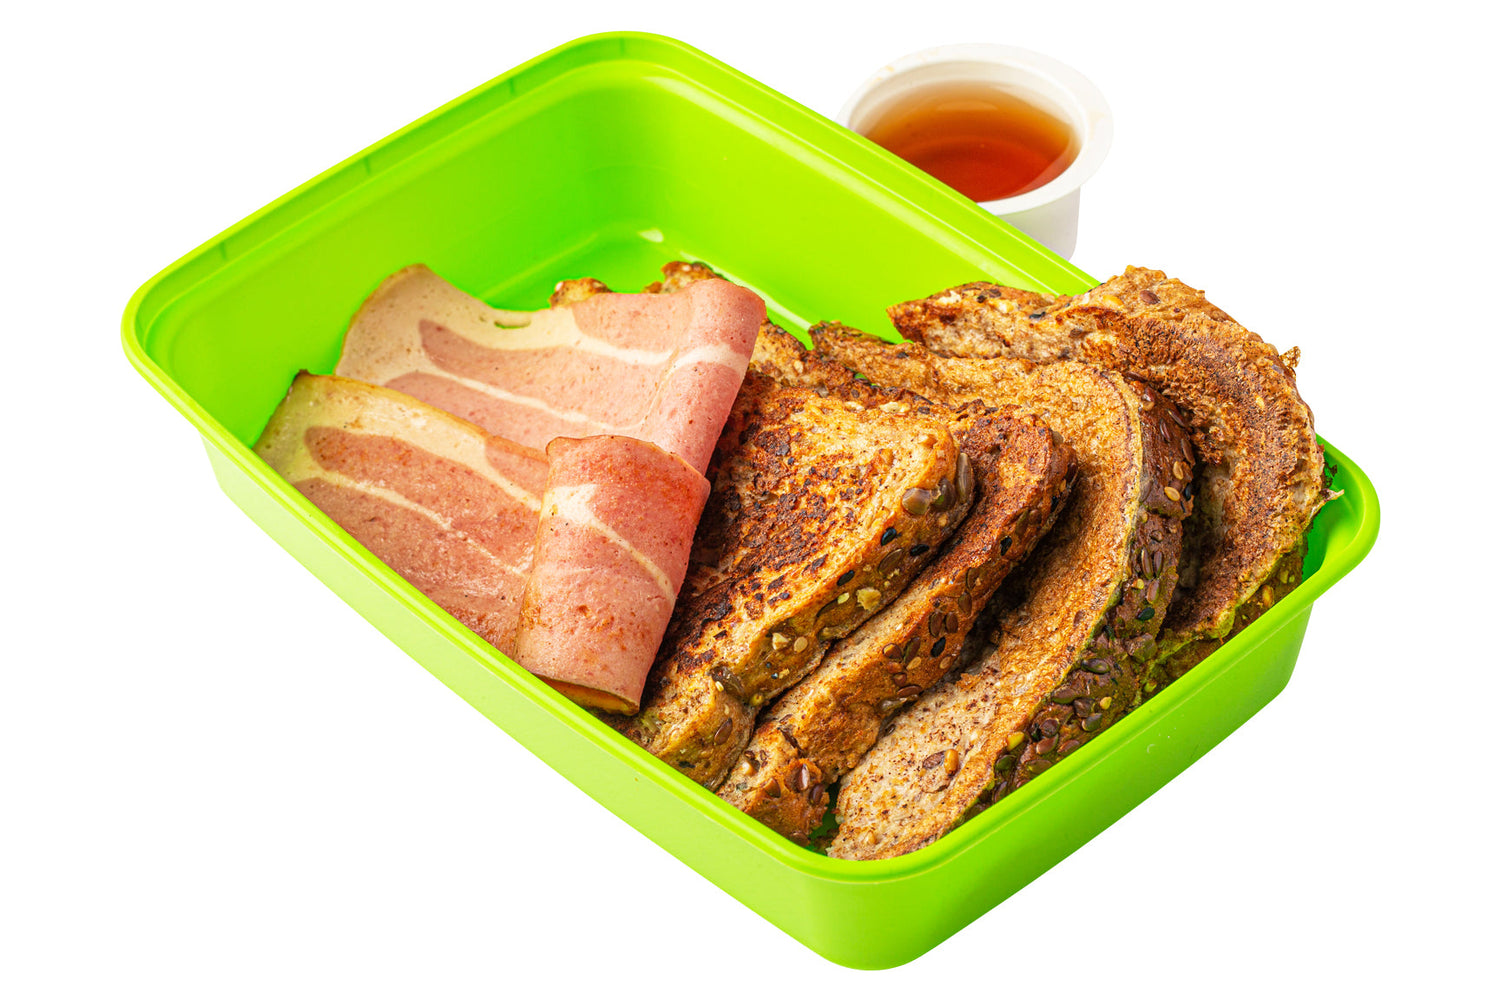 Two slices of Whole Grain & Seed Bread marinated in Vanilla Cinnamon Protein French Toast Batter. Two slices of Turkey Bacon and No Sugar Added Syrup | Breakfast meal prep delivered, meal prep services, meal prep companies